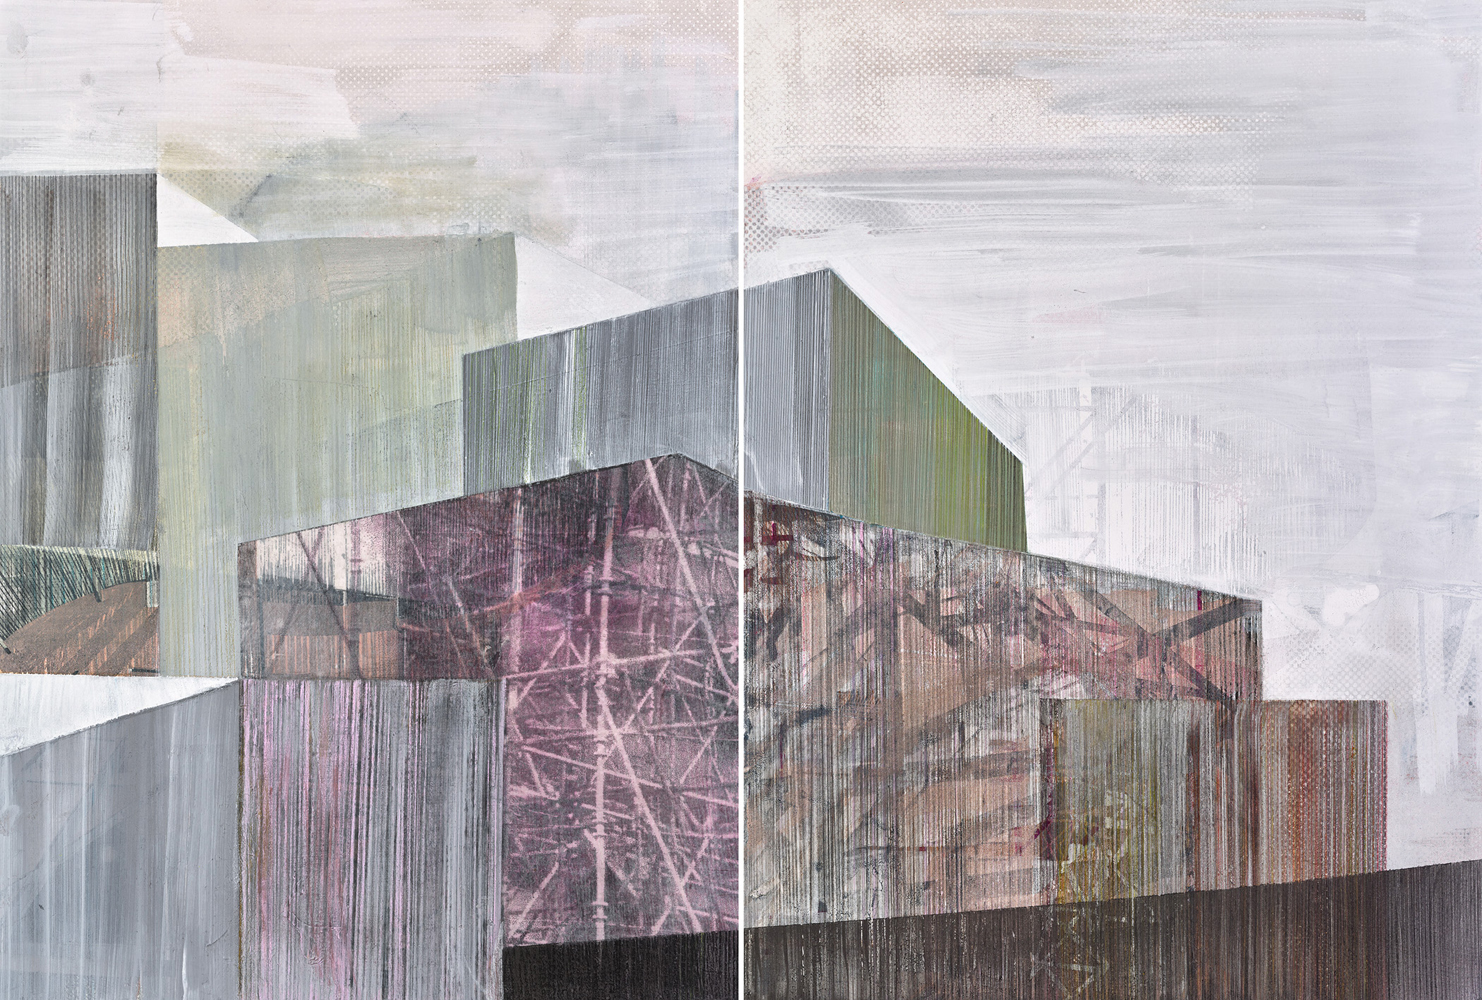 Amanda Knowles, City View, 2020, screen print, graphite, acrylic on paper, 15 x 22 inches, $1200.